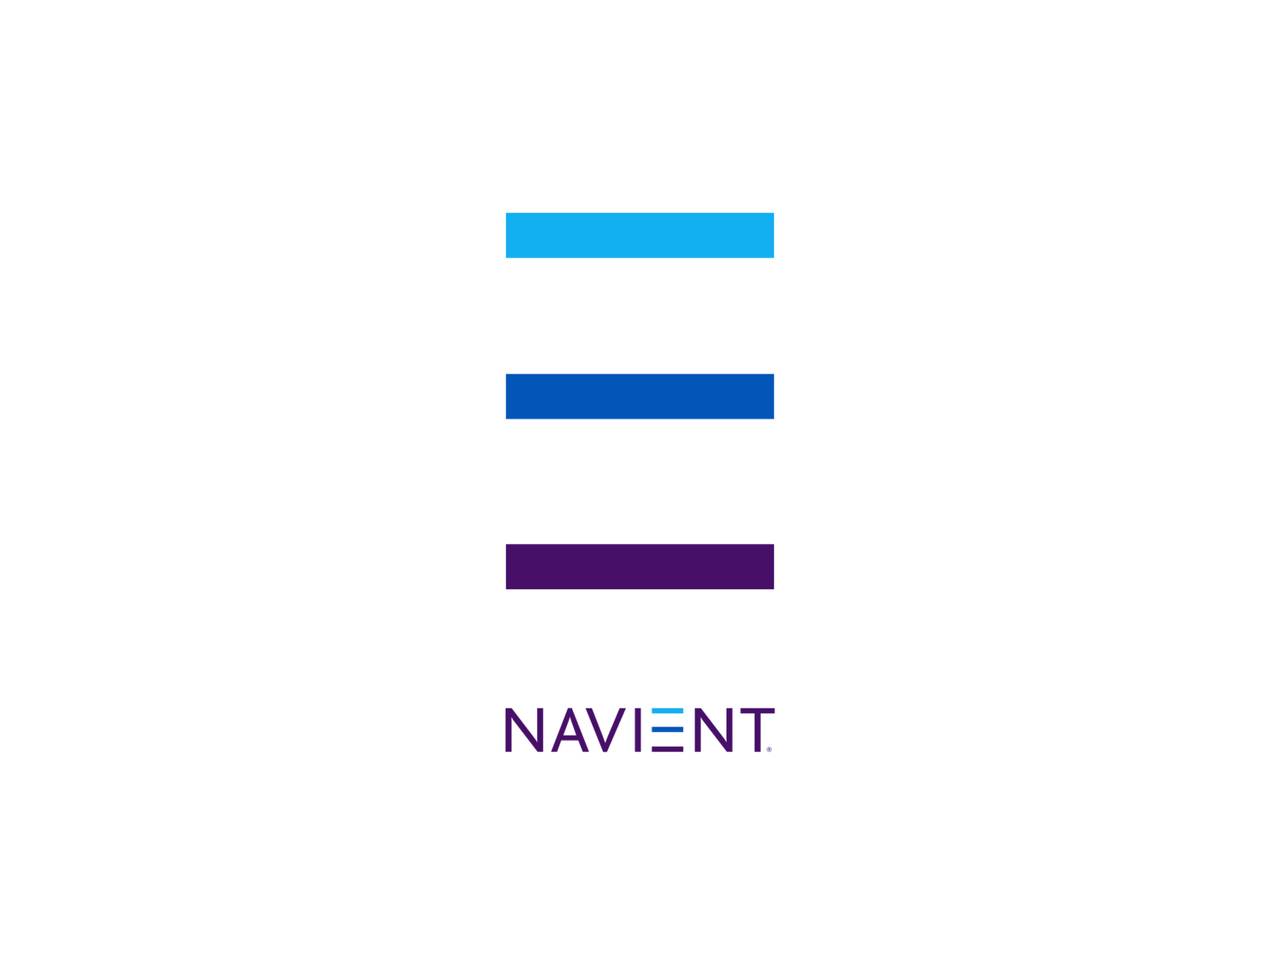 Navient Corp 2018 Q2 Results Earnings Call Slides